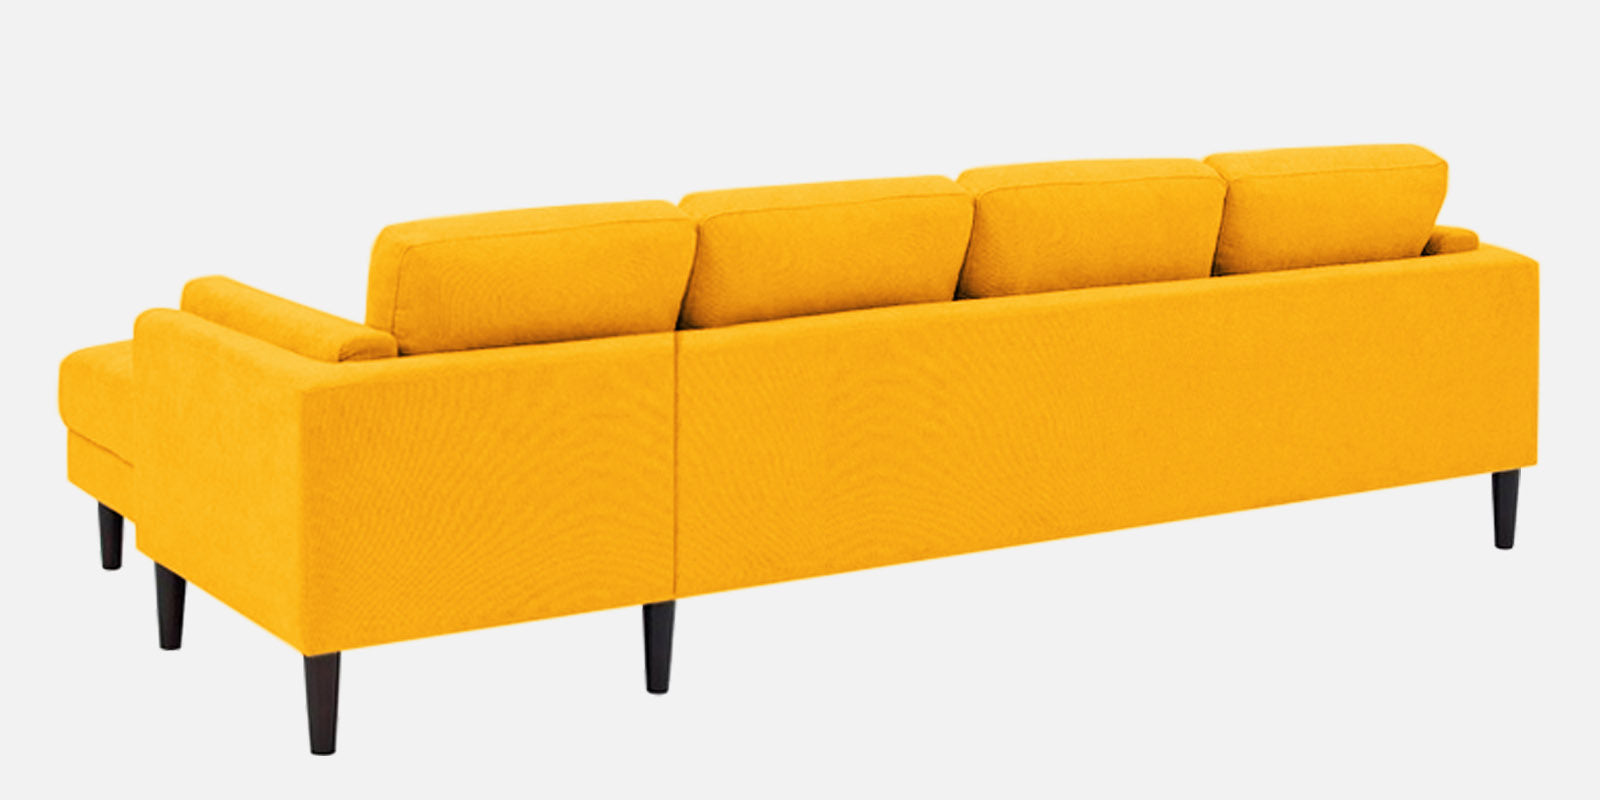 Creata Fabric LHS Sectional Sofa (3+Lounger) in Bold Yellow Colour by Febonic